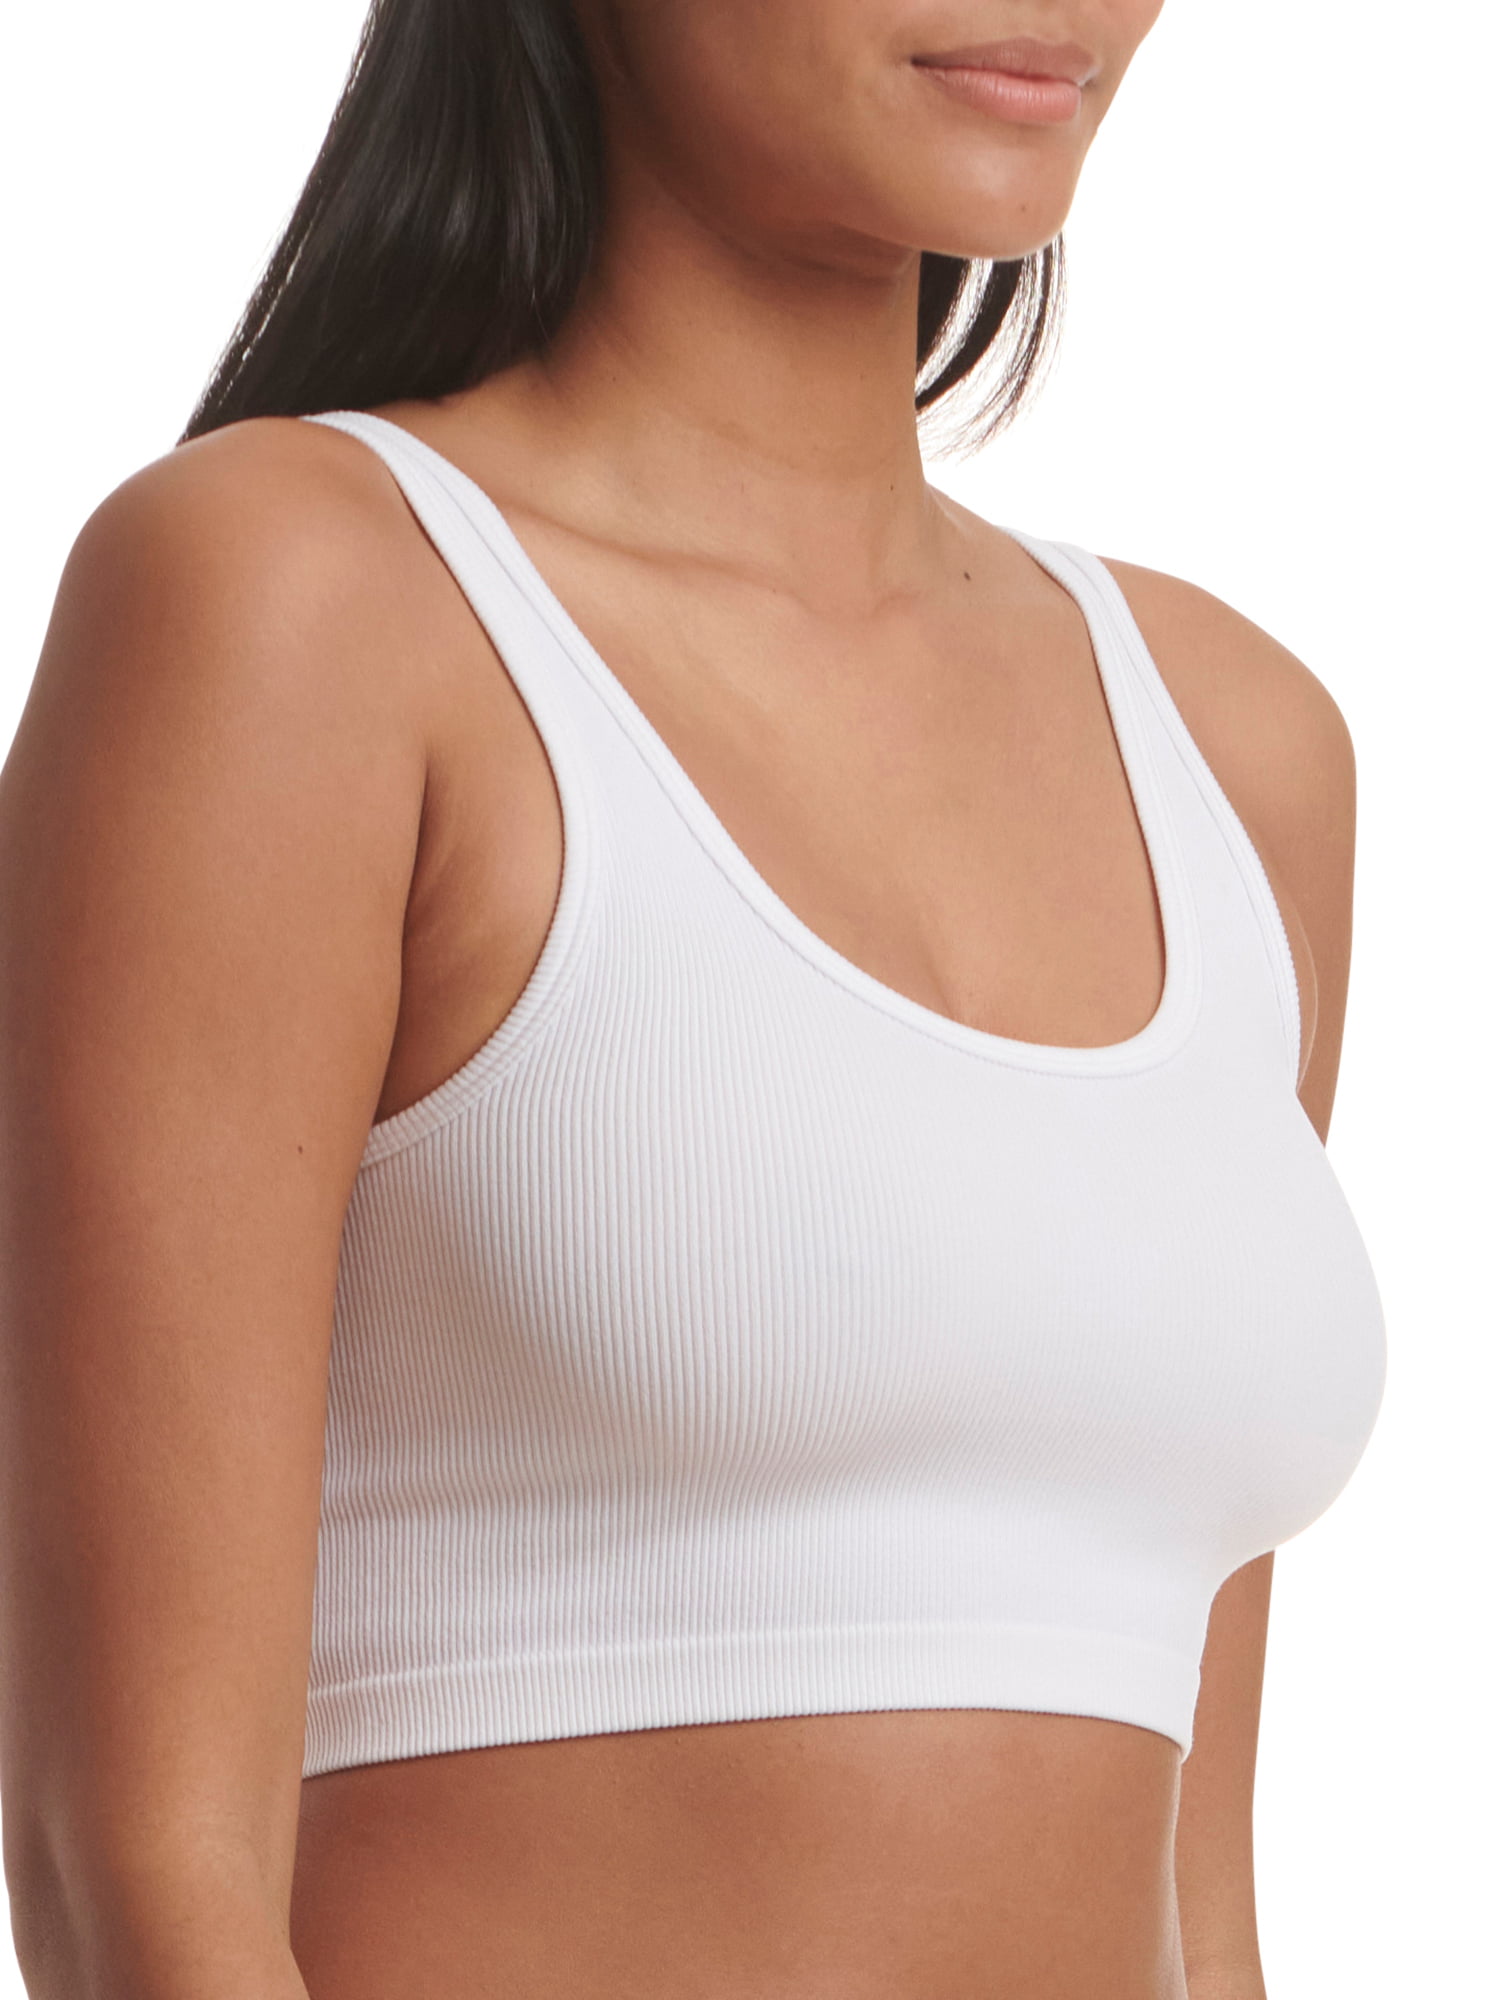 Holzkary Bottoming Wear Sports Women's Beauty Camisole Wrap Back Bra Chest  Top Outer Keyhole Sports Bra White